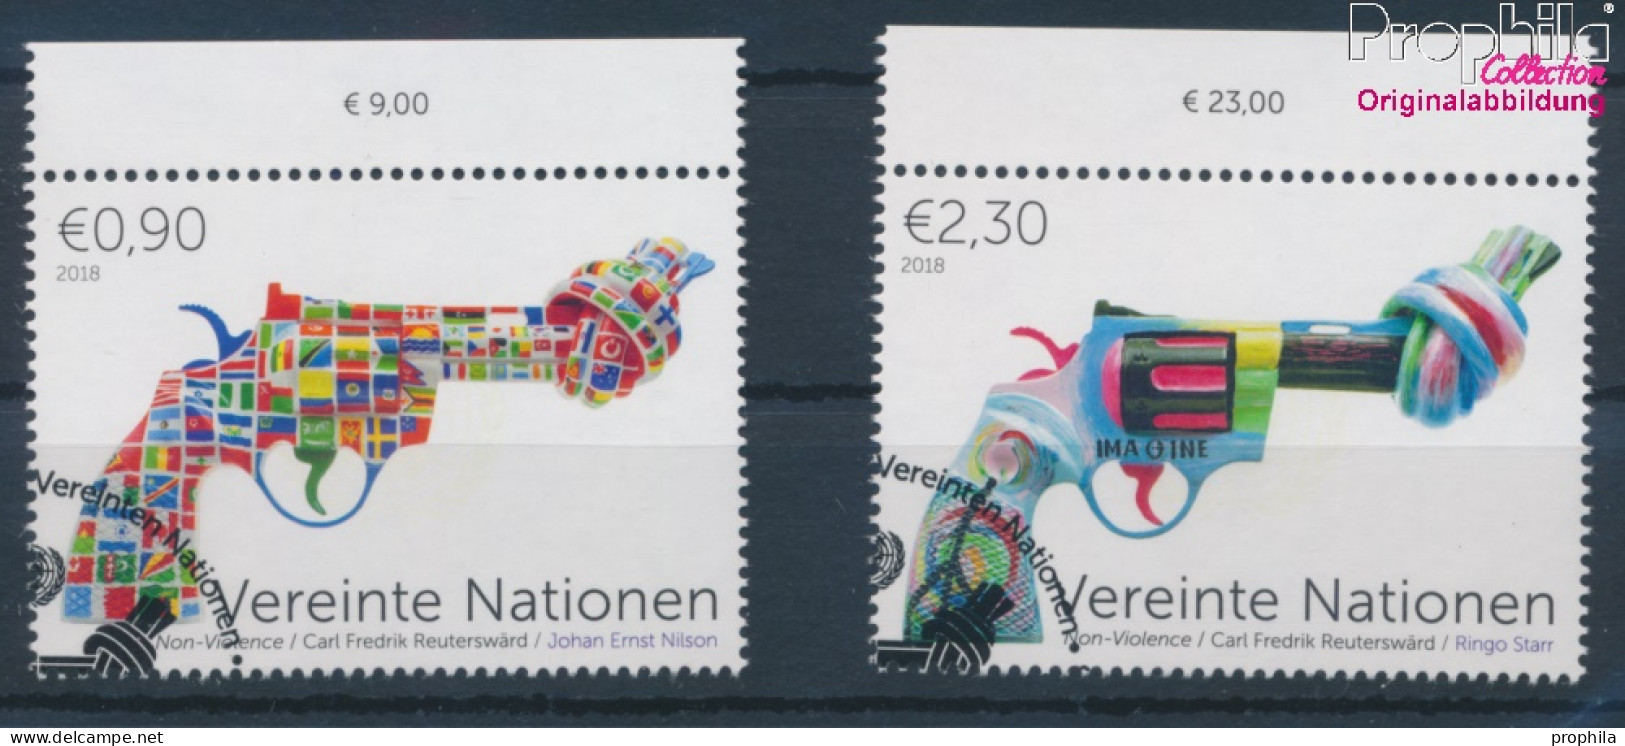 UNO - Wien 1041-1042 (kompl.Ausg.) Gestempelt 2018 Non Violence Project (10216420 - Used Stamps